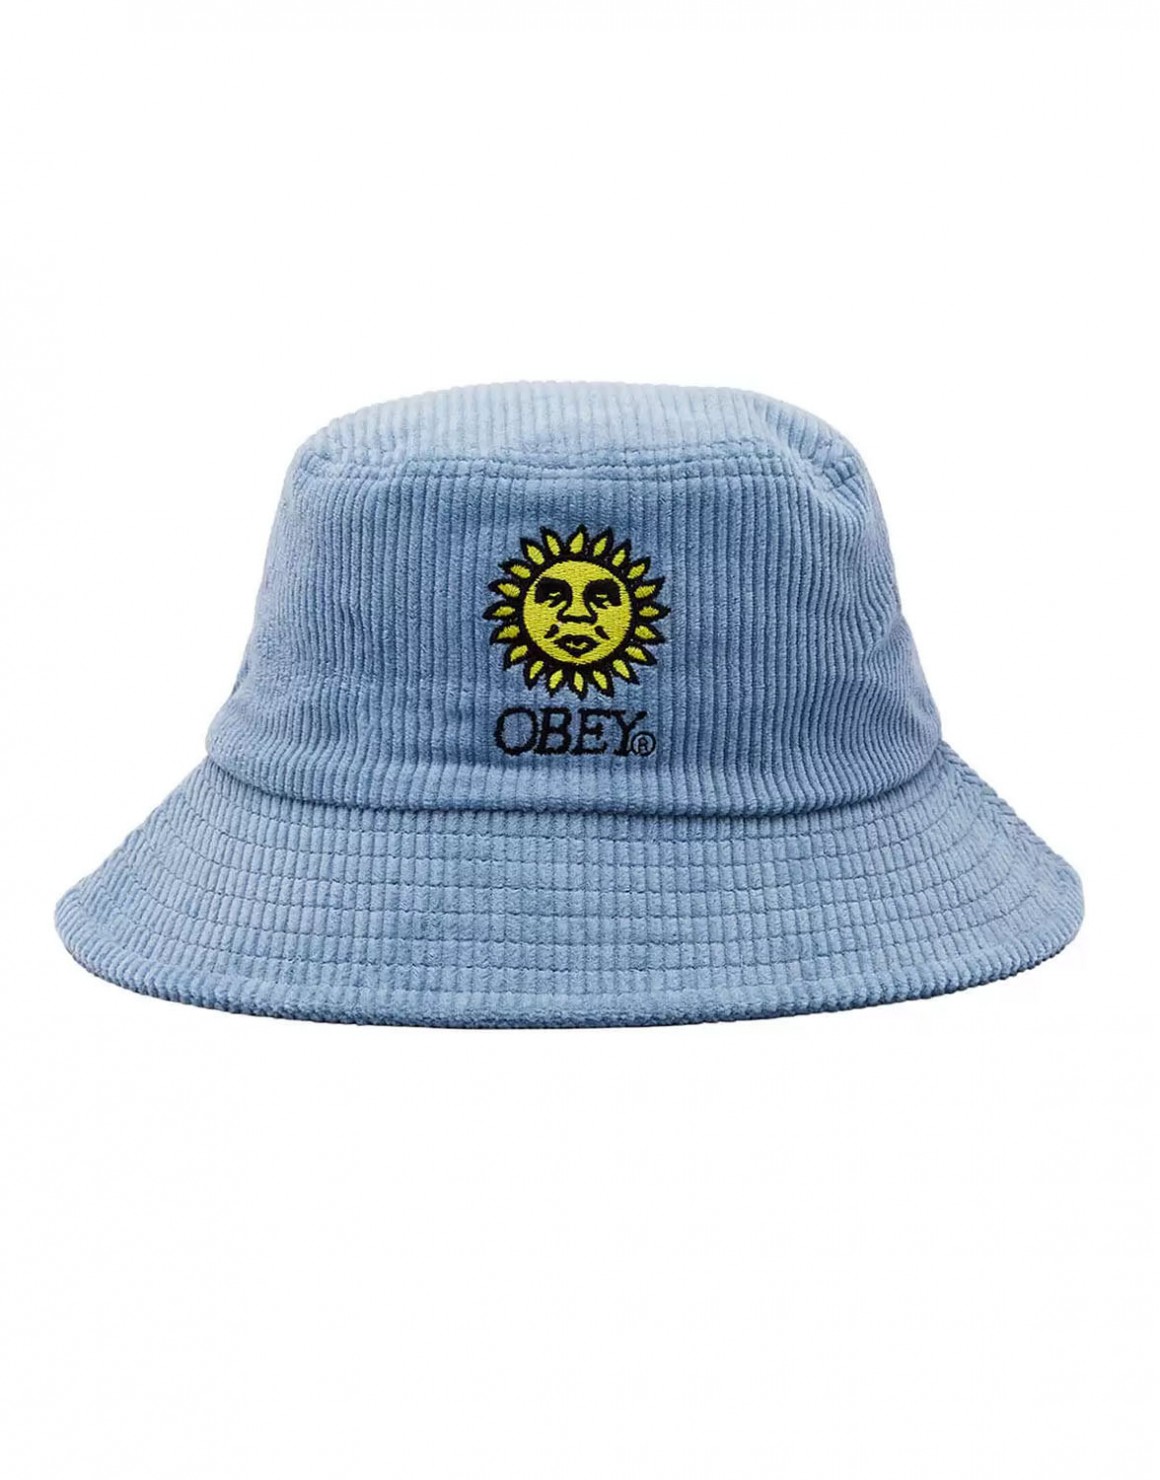 Obey Sunny Cord Bucket Hat